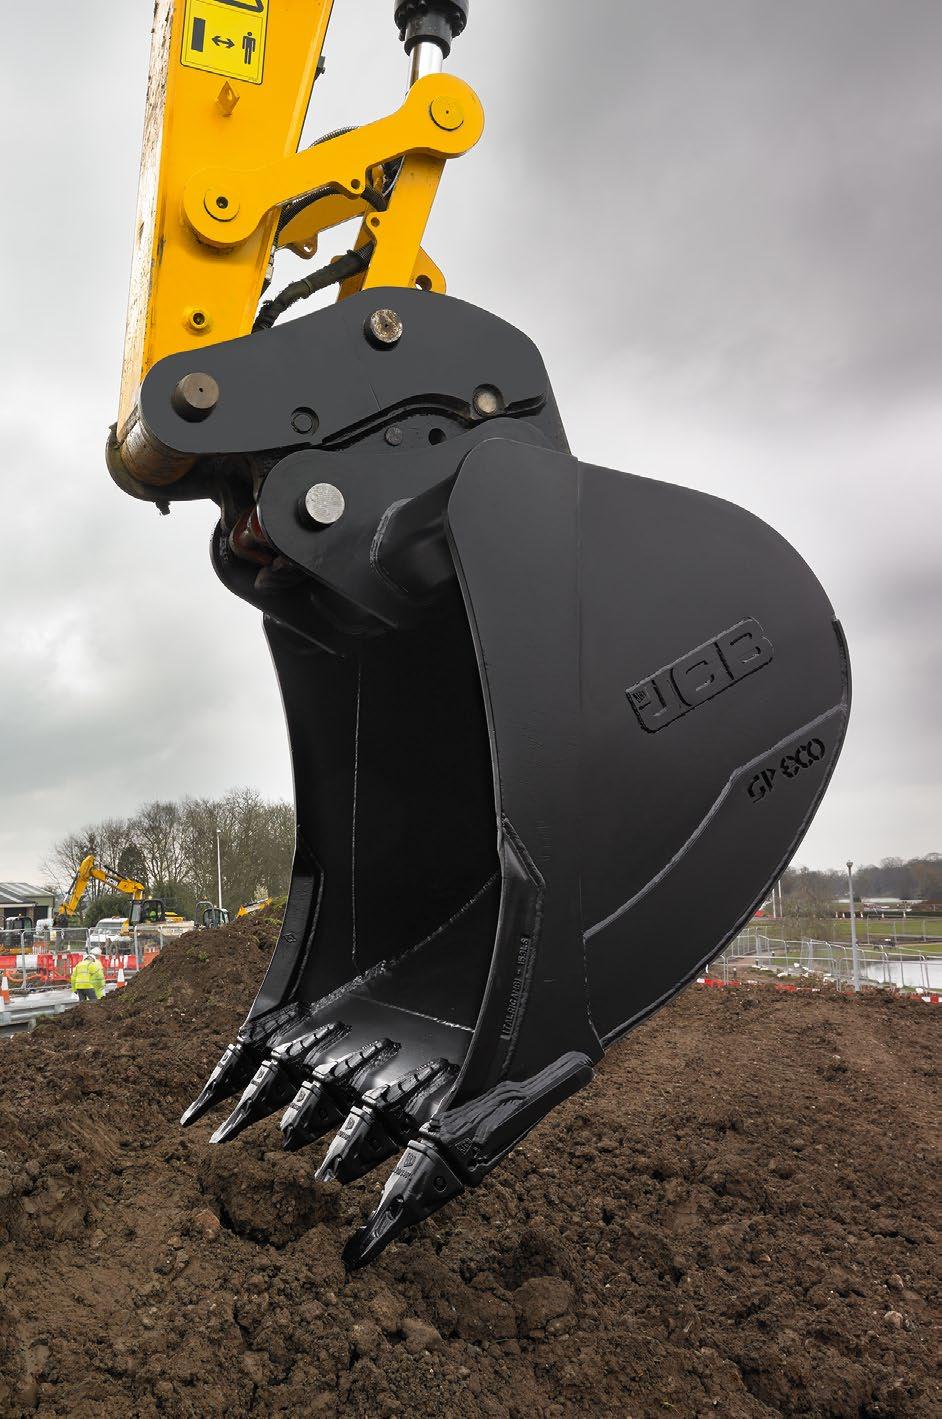 Excavator Buckets - General Purpose Excavator Buckets - General Purpose Improved productivity from innovative design profile giving more efficient digging, better soil retention and clean release of